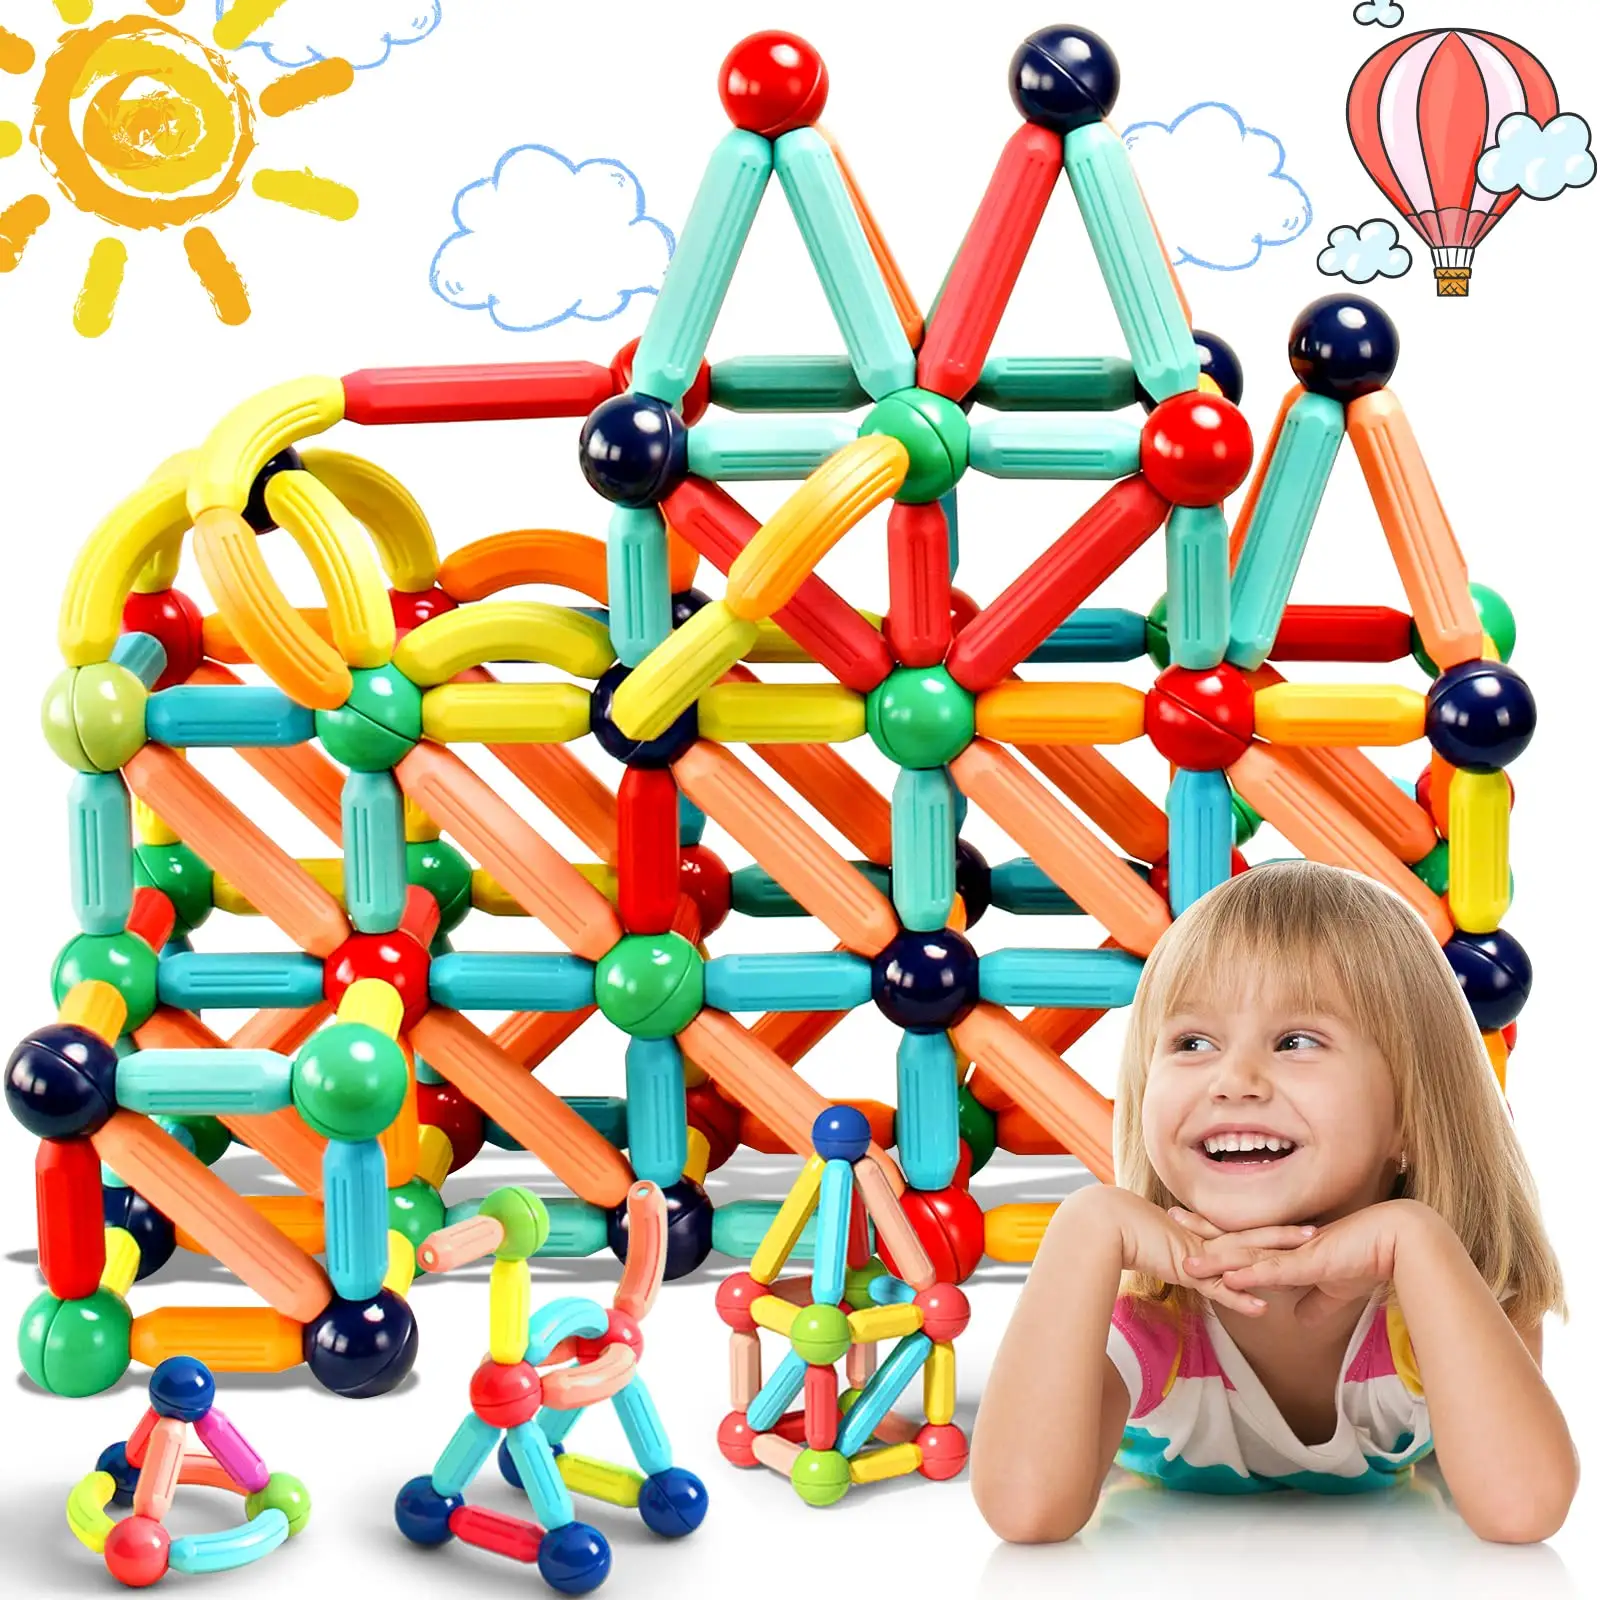 Diy 3d Kids Creative Educational Toy Assembly Building Game Magnet Stick Toys Magnet Rods Magnetic Building Blocks